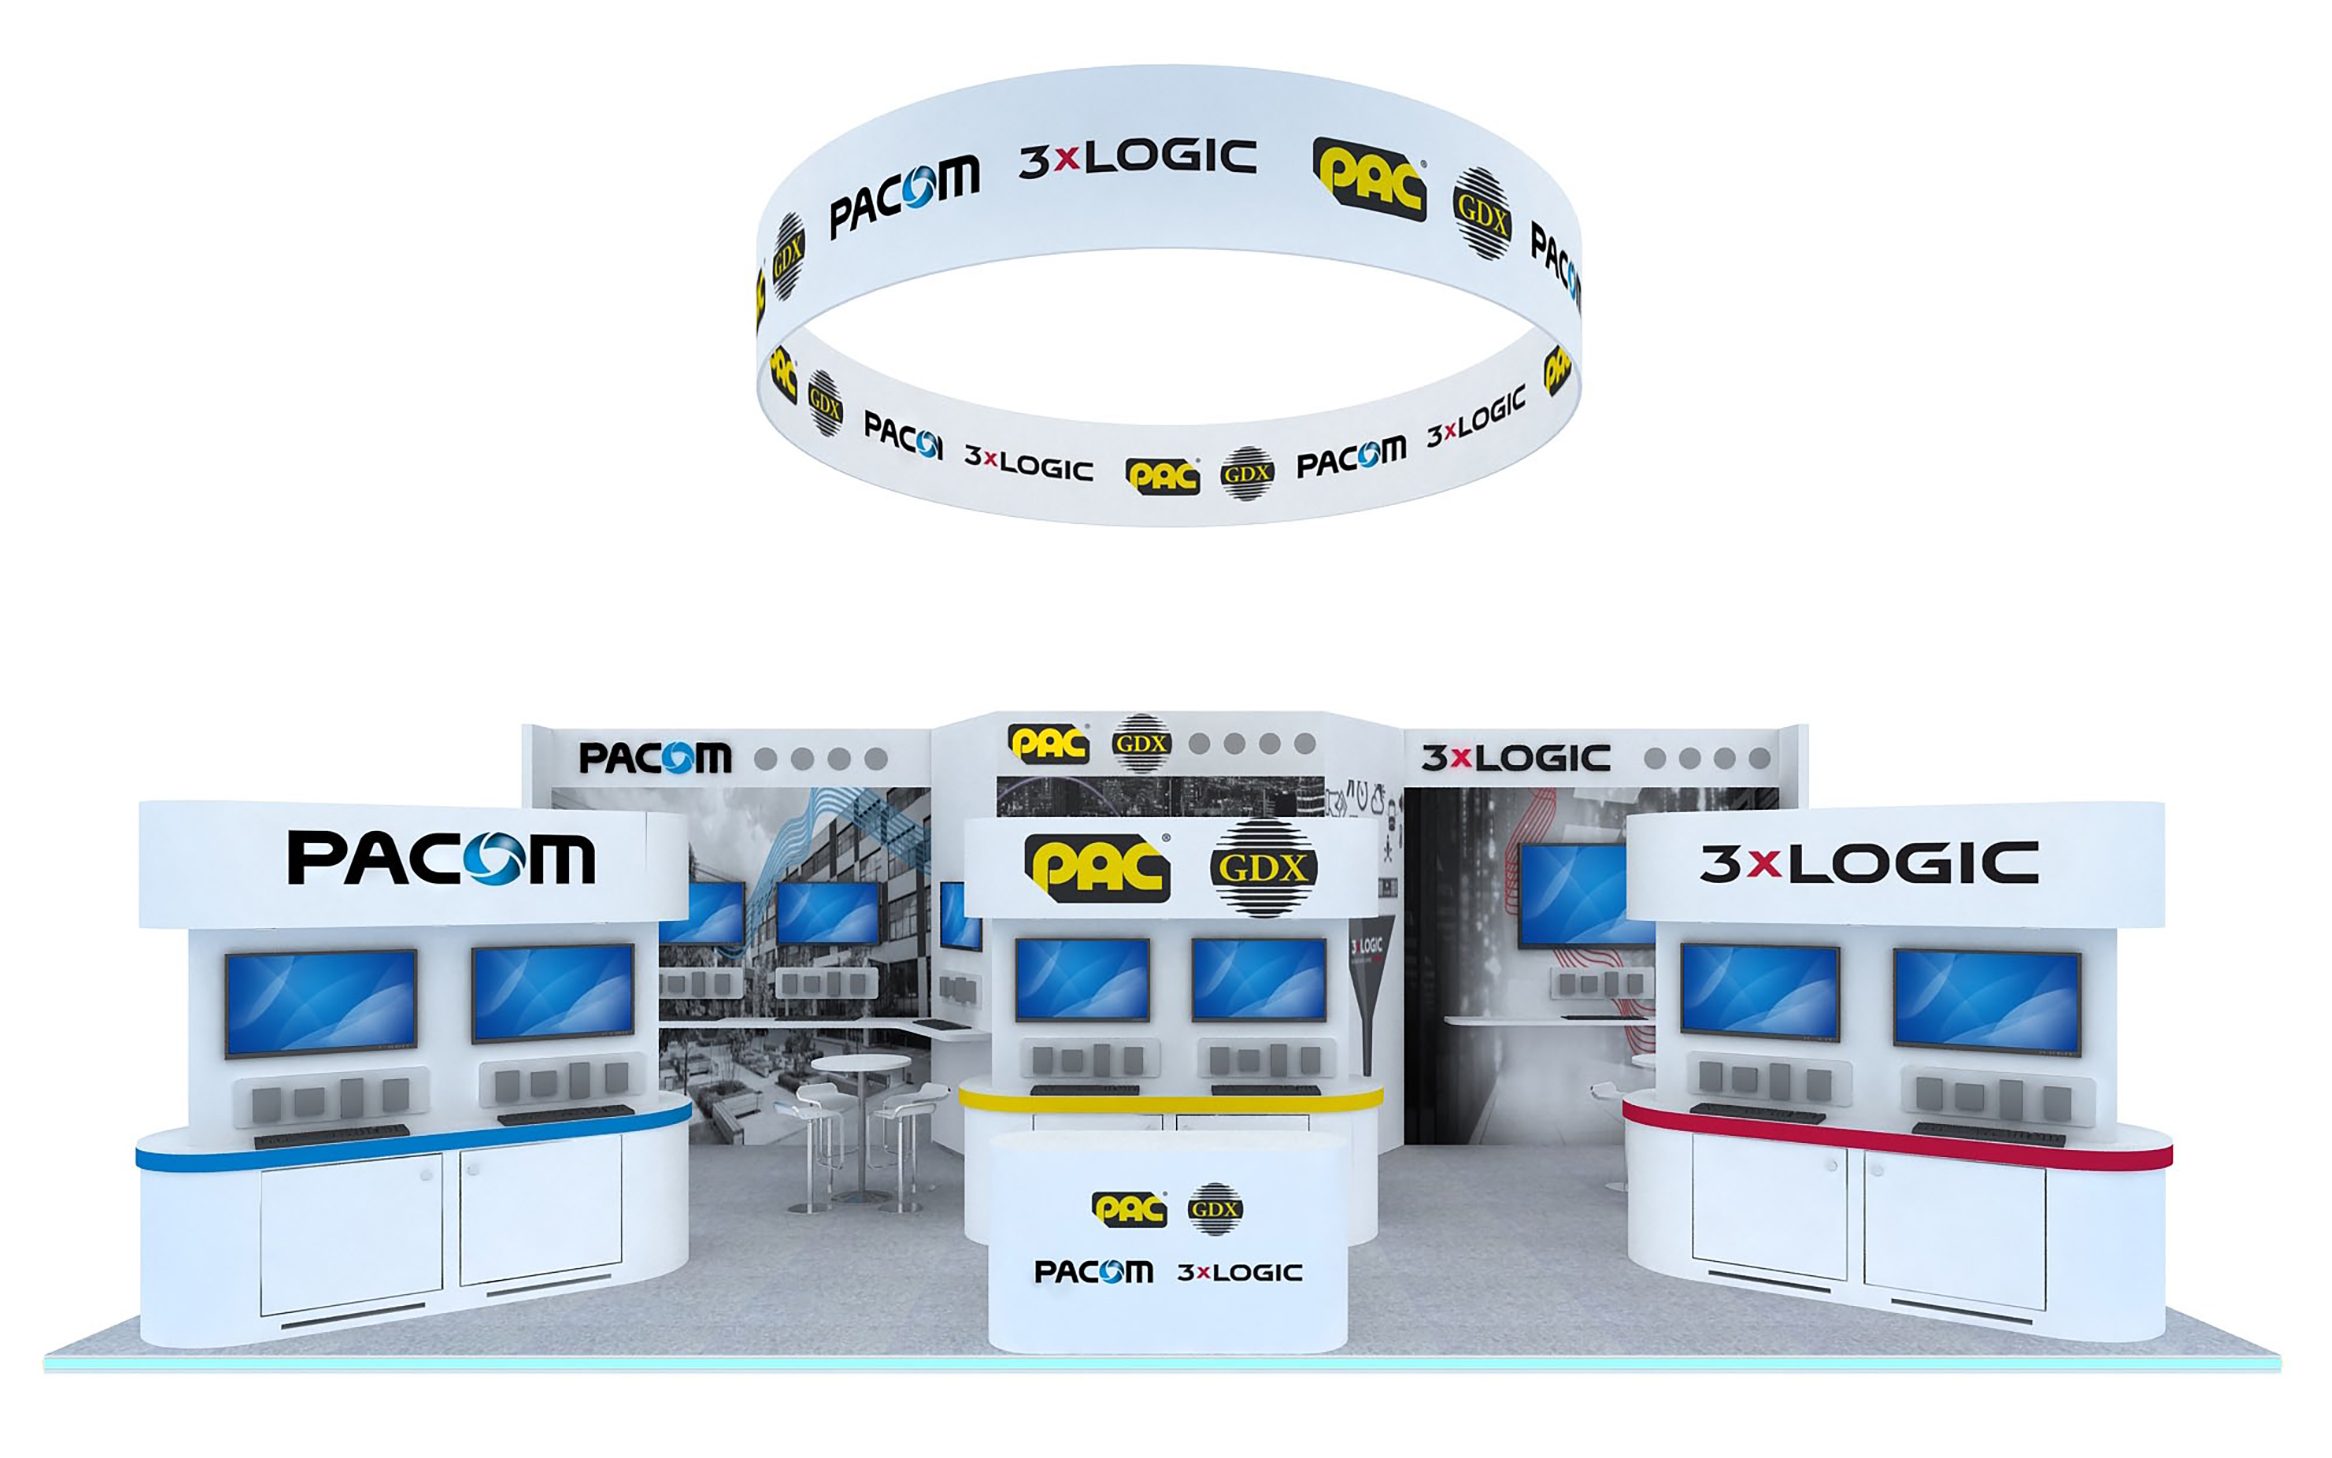 3xLOGIC, PAC GDX and PACOM demonstrate their latest cutting edge security innovations at IFSEC International 2019